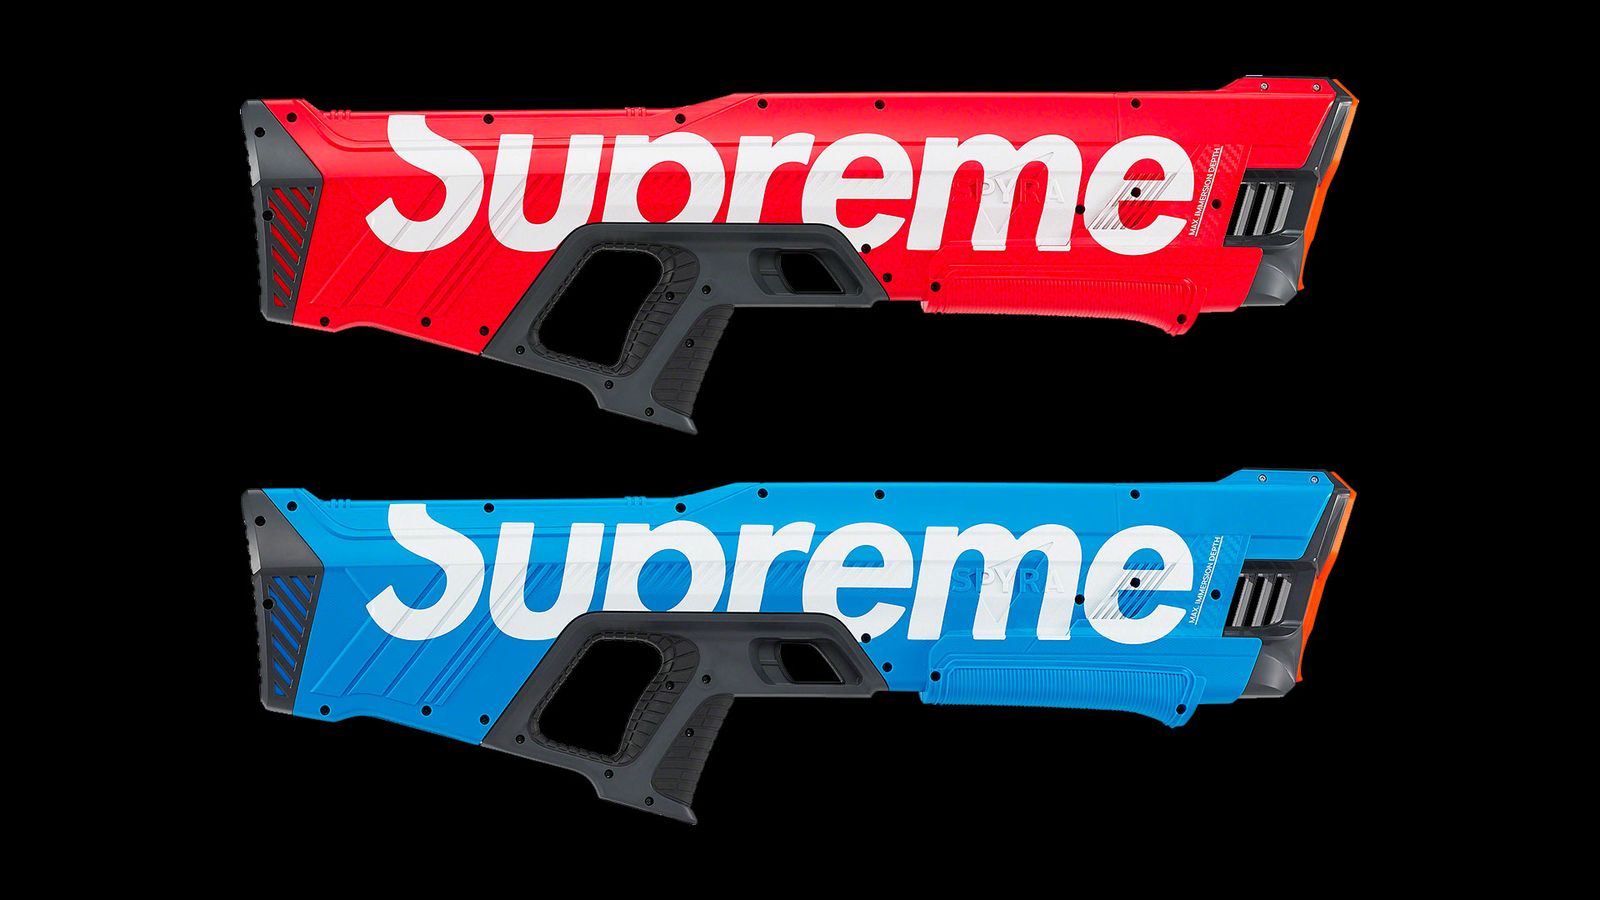 Supreme x SpyraTwo Water Blaster product image of a red and light blue pair of water guns.